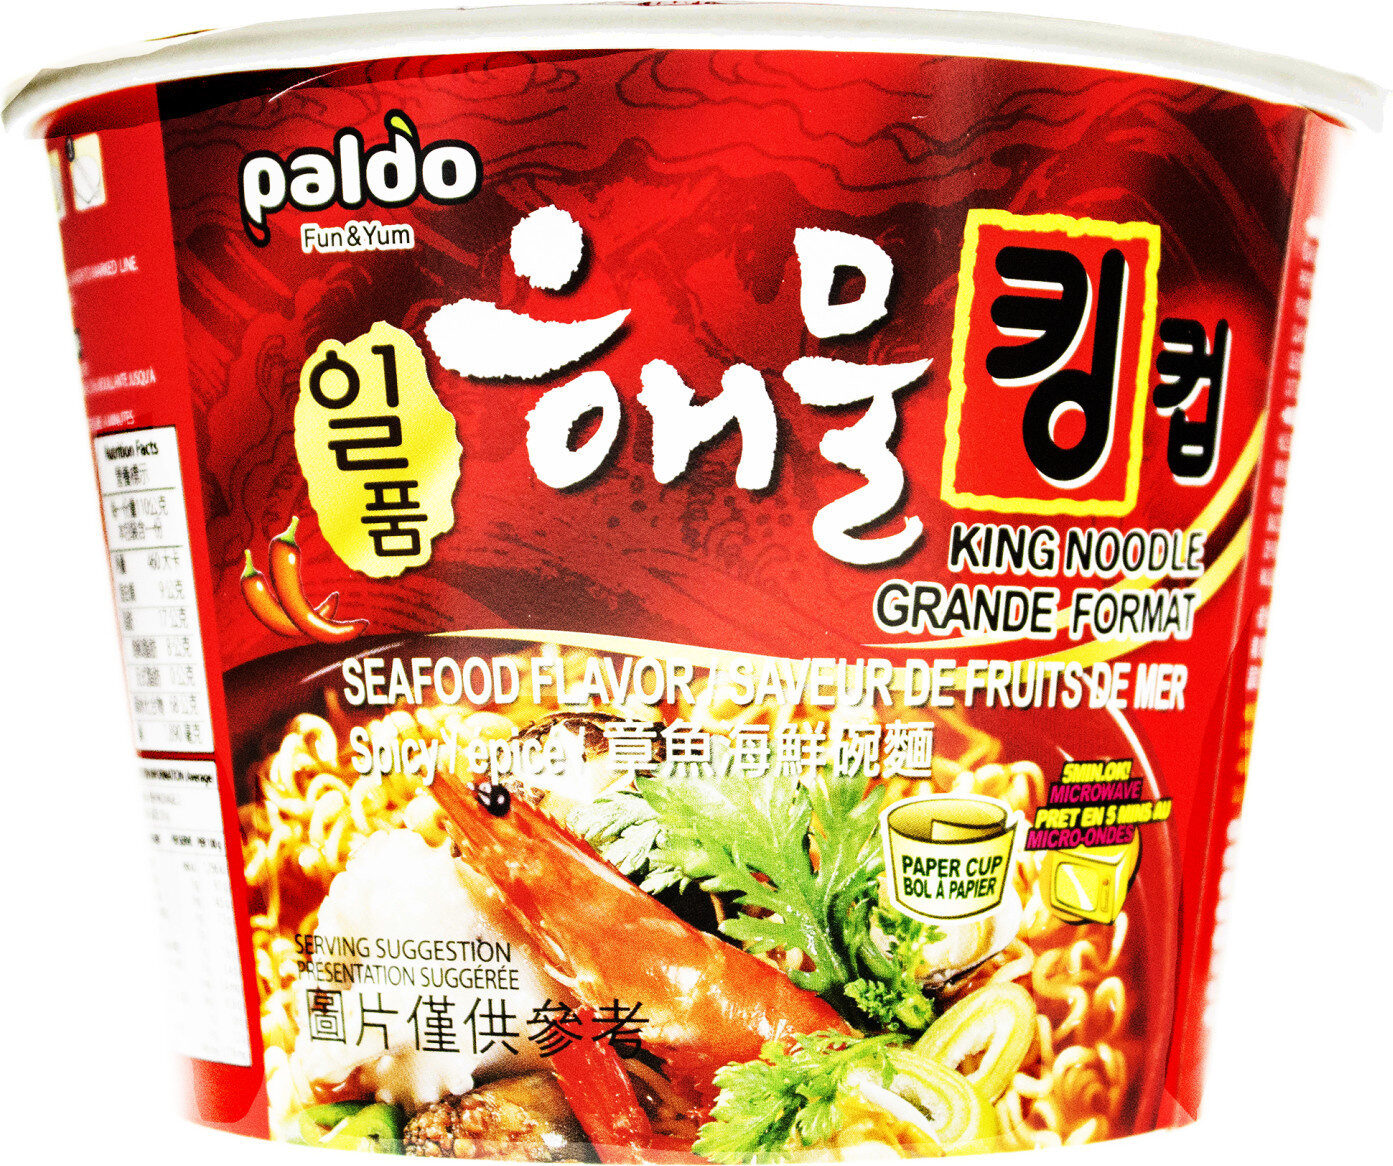 King noodle seafood flavor - Product